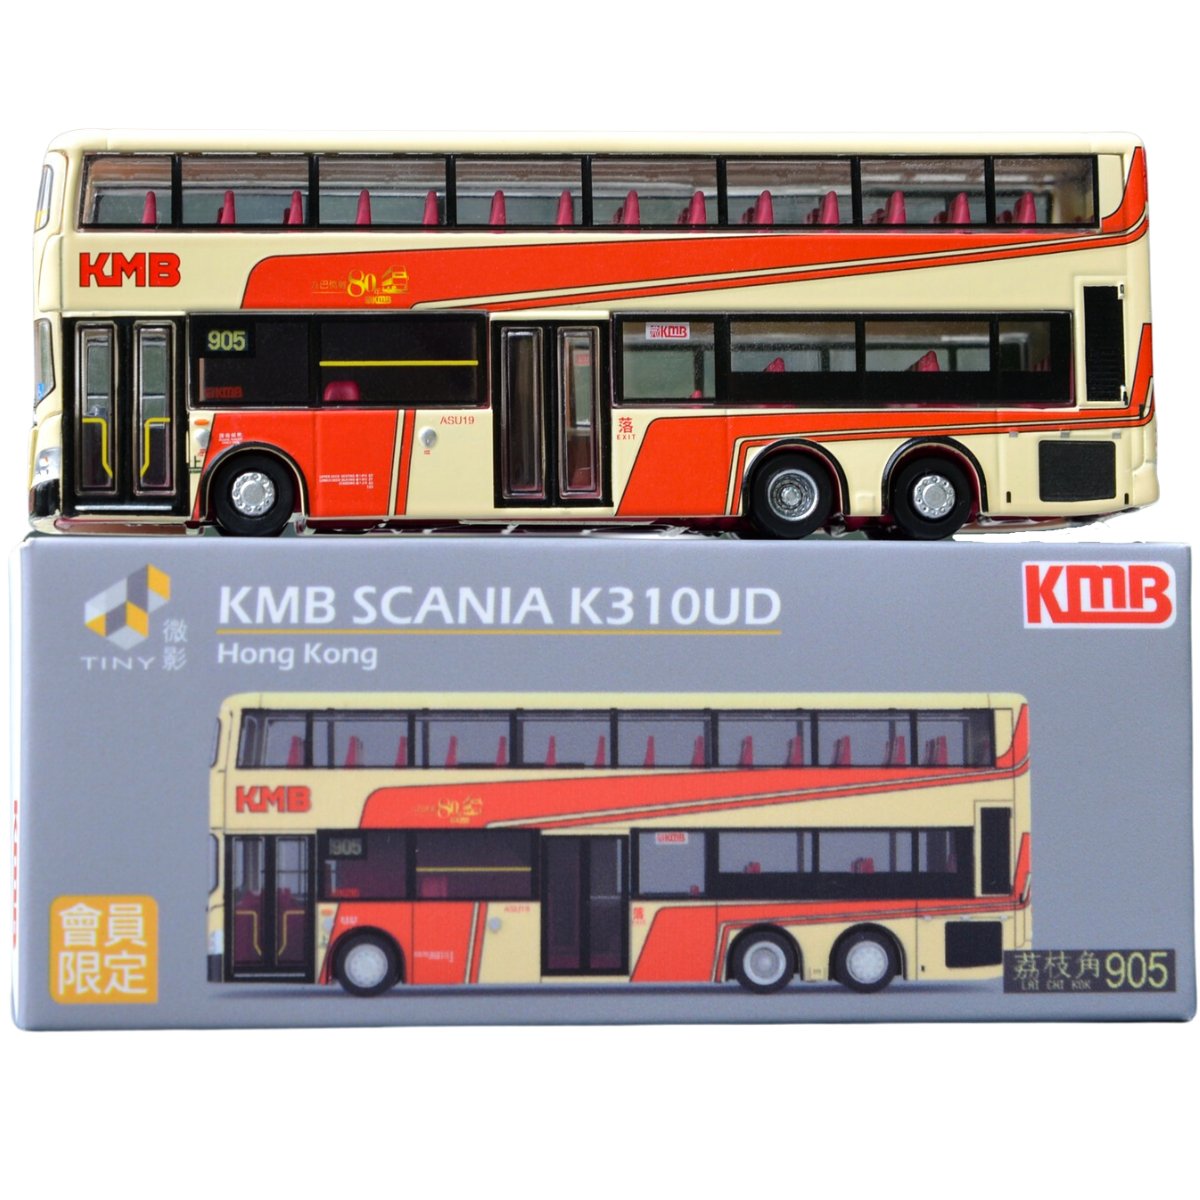 Tiny Models KMB Scania K310UD (1:110 Scale) - Phillips Hobbies